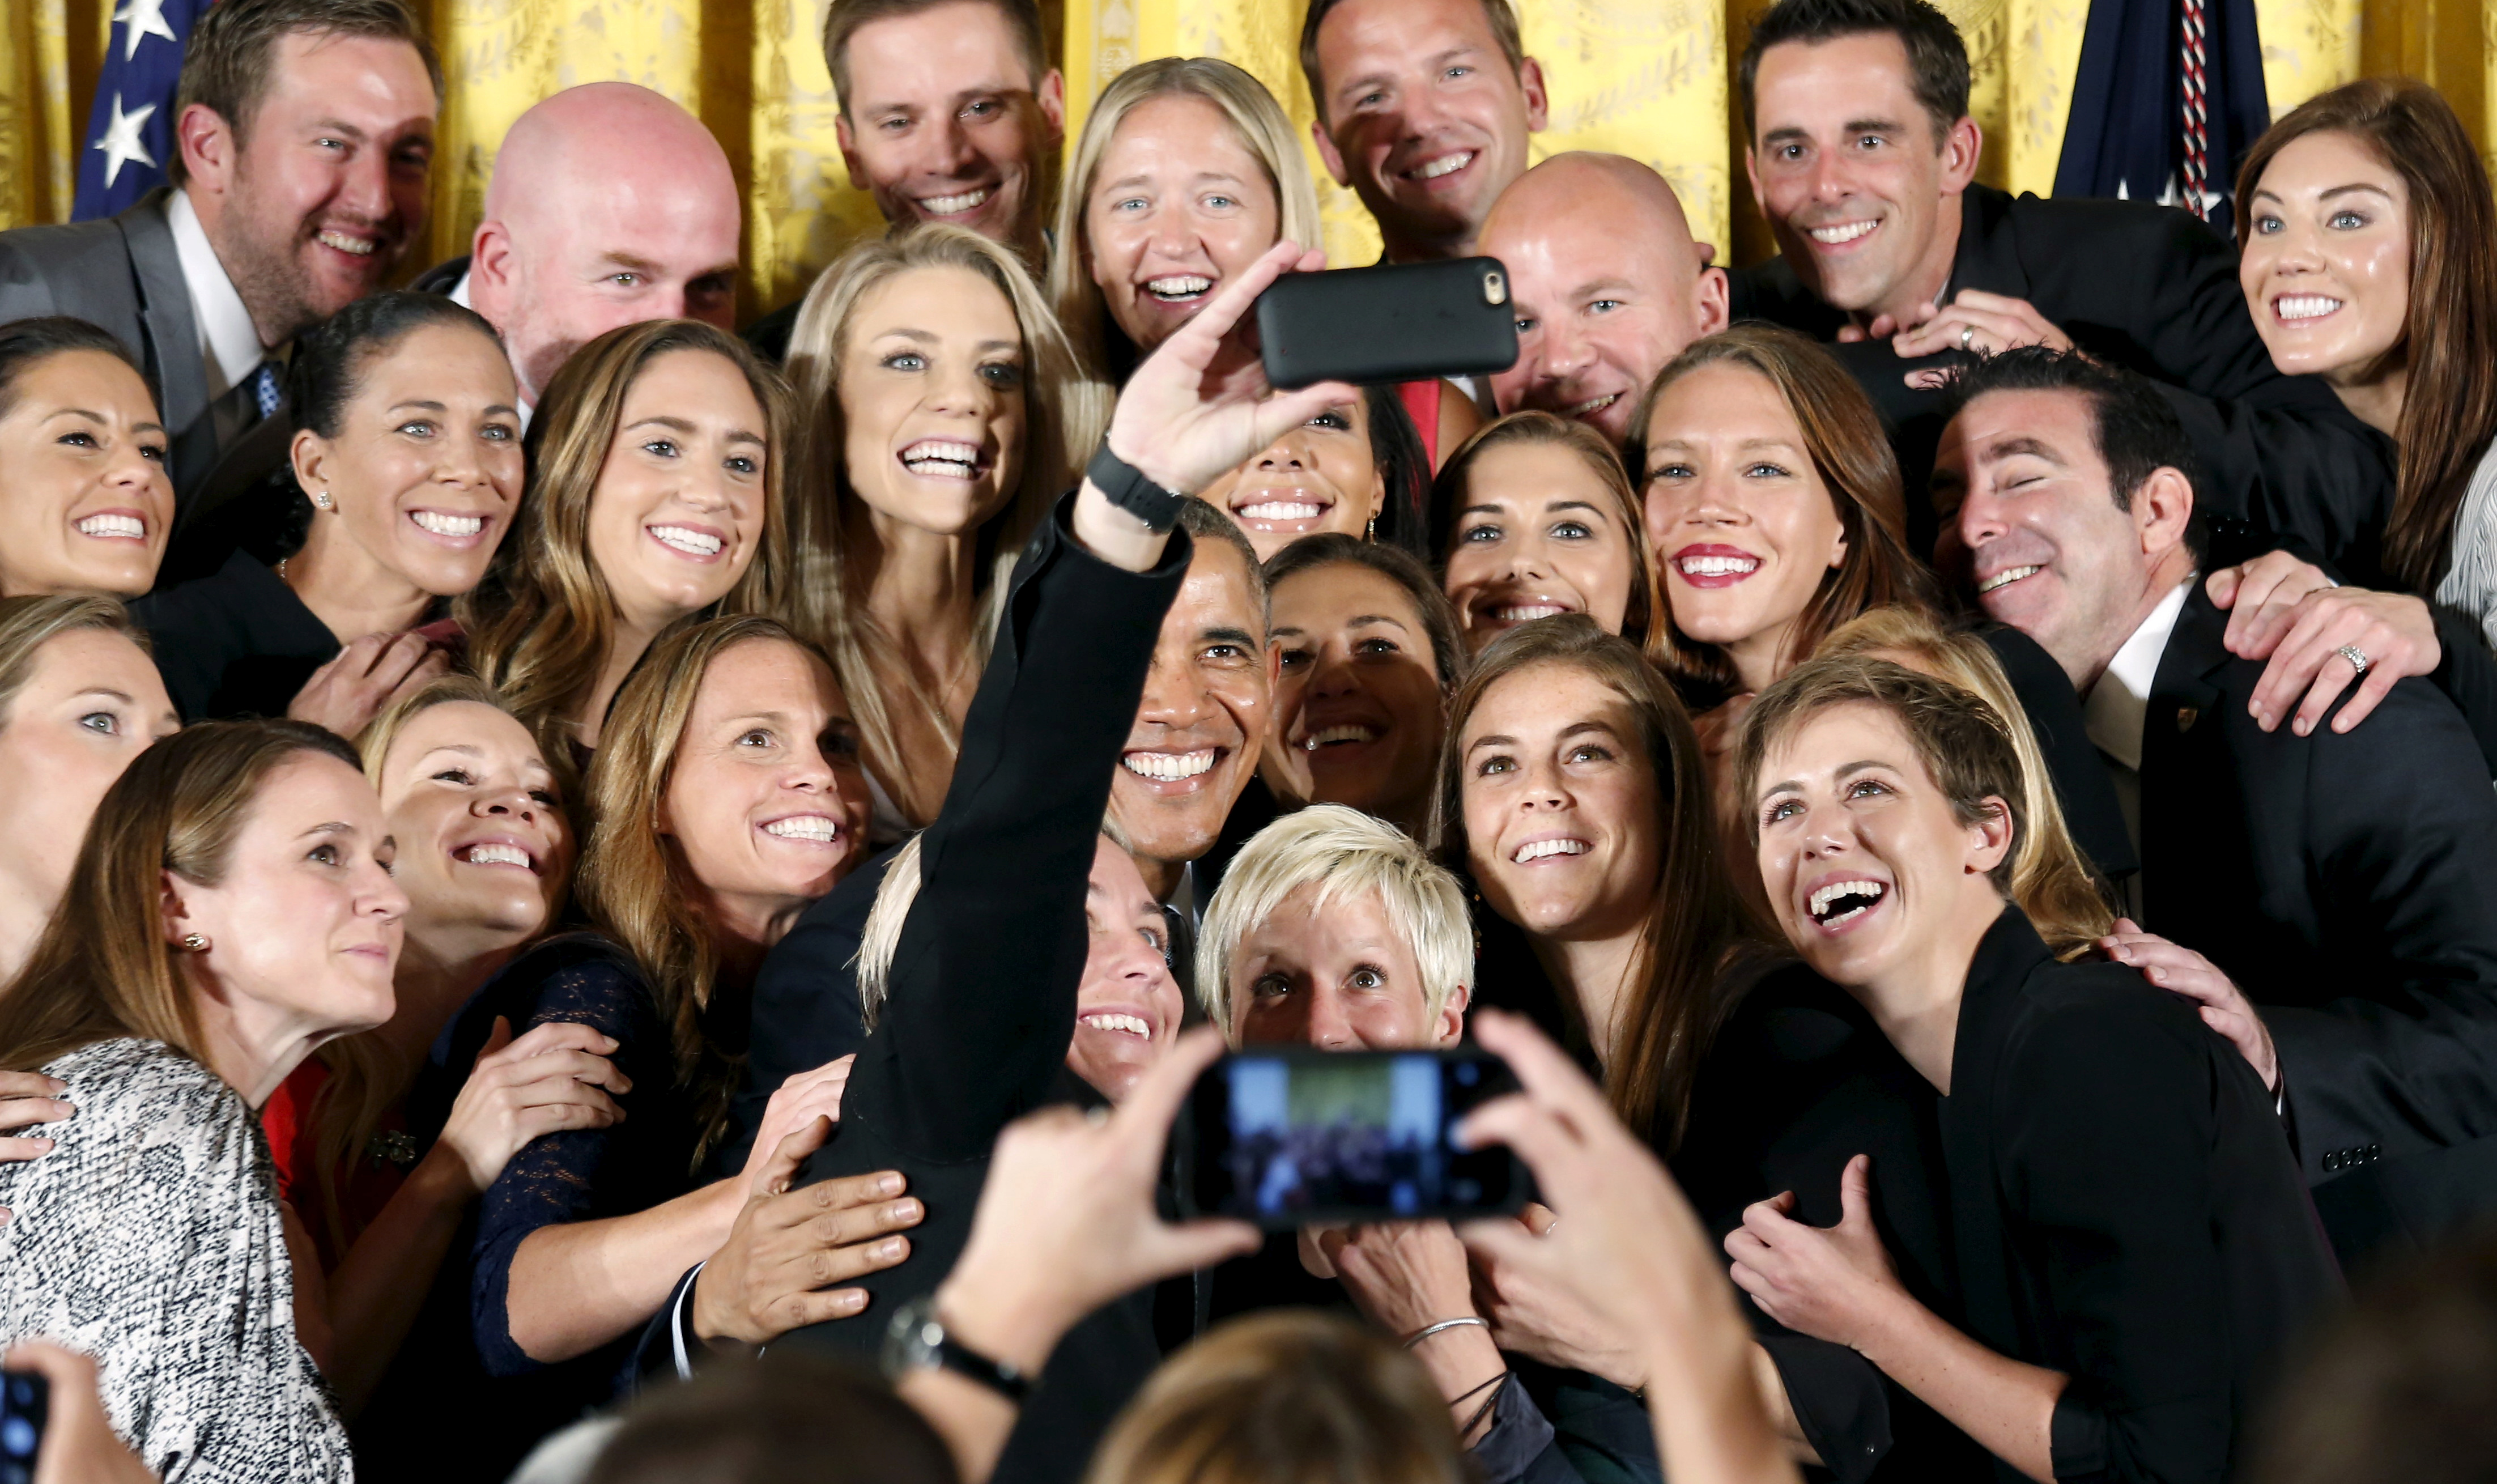 FILE PHOTO: U.S. President Barack Obama poses for a selfie taken by veteran star player Abby Wambach during an event honoring the United States Women's National Soccer Team's victory in the 2015 FIFA Women's World Cup at the White House in Washington October 27, 2015. REUTERS/Kevin Lamarque/File Photo 